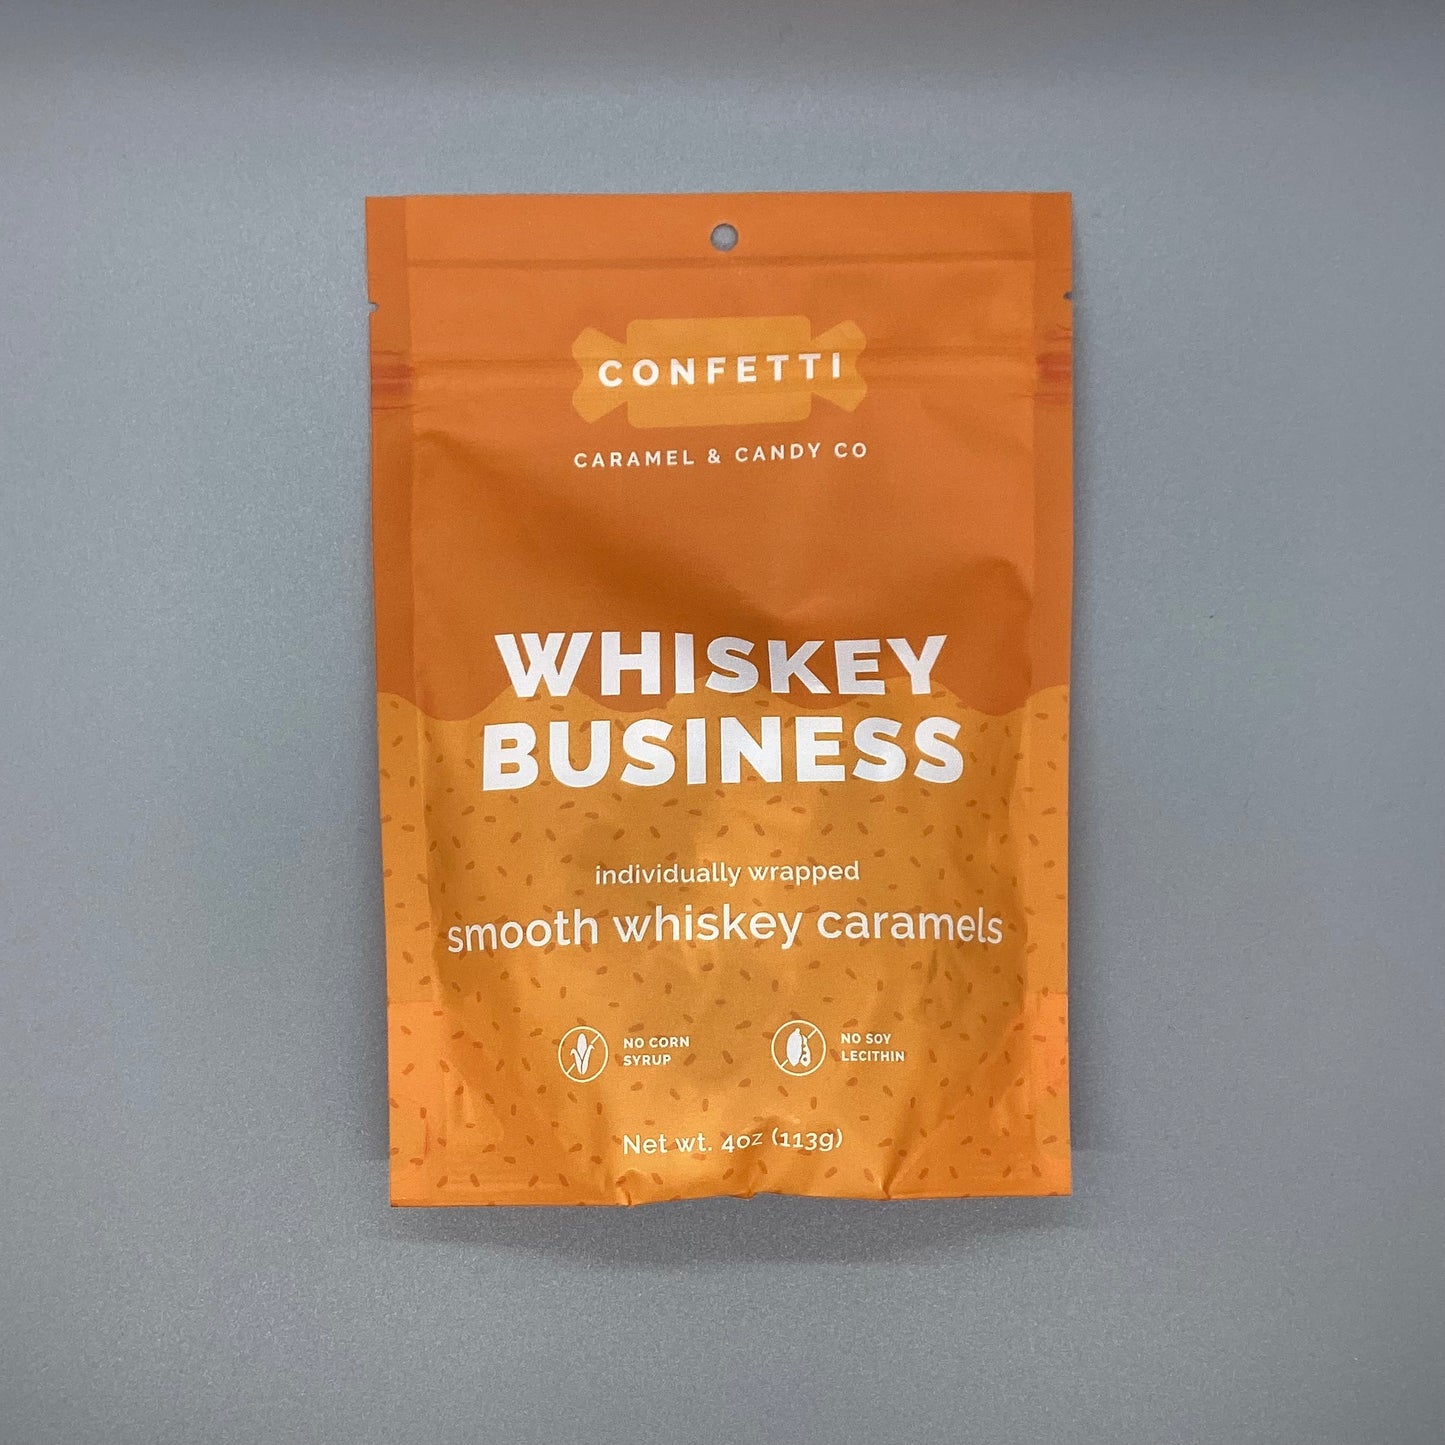 Confetti Whiskey Business Caramels